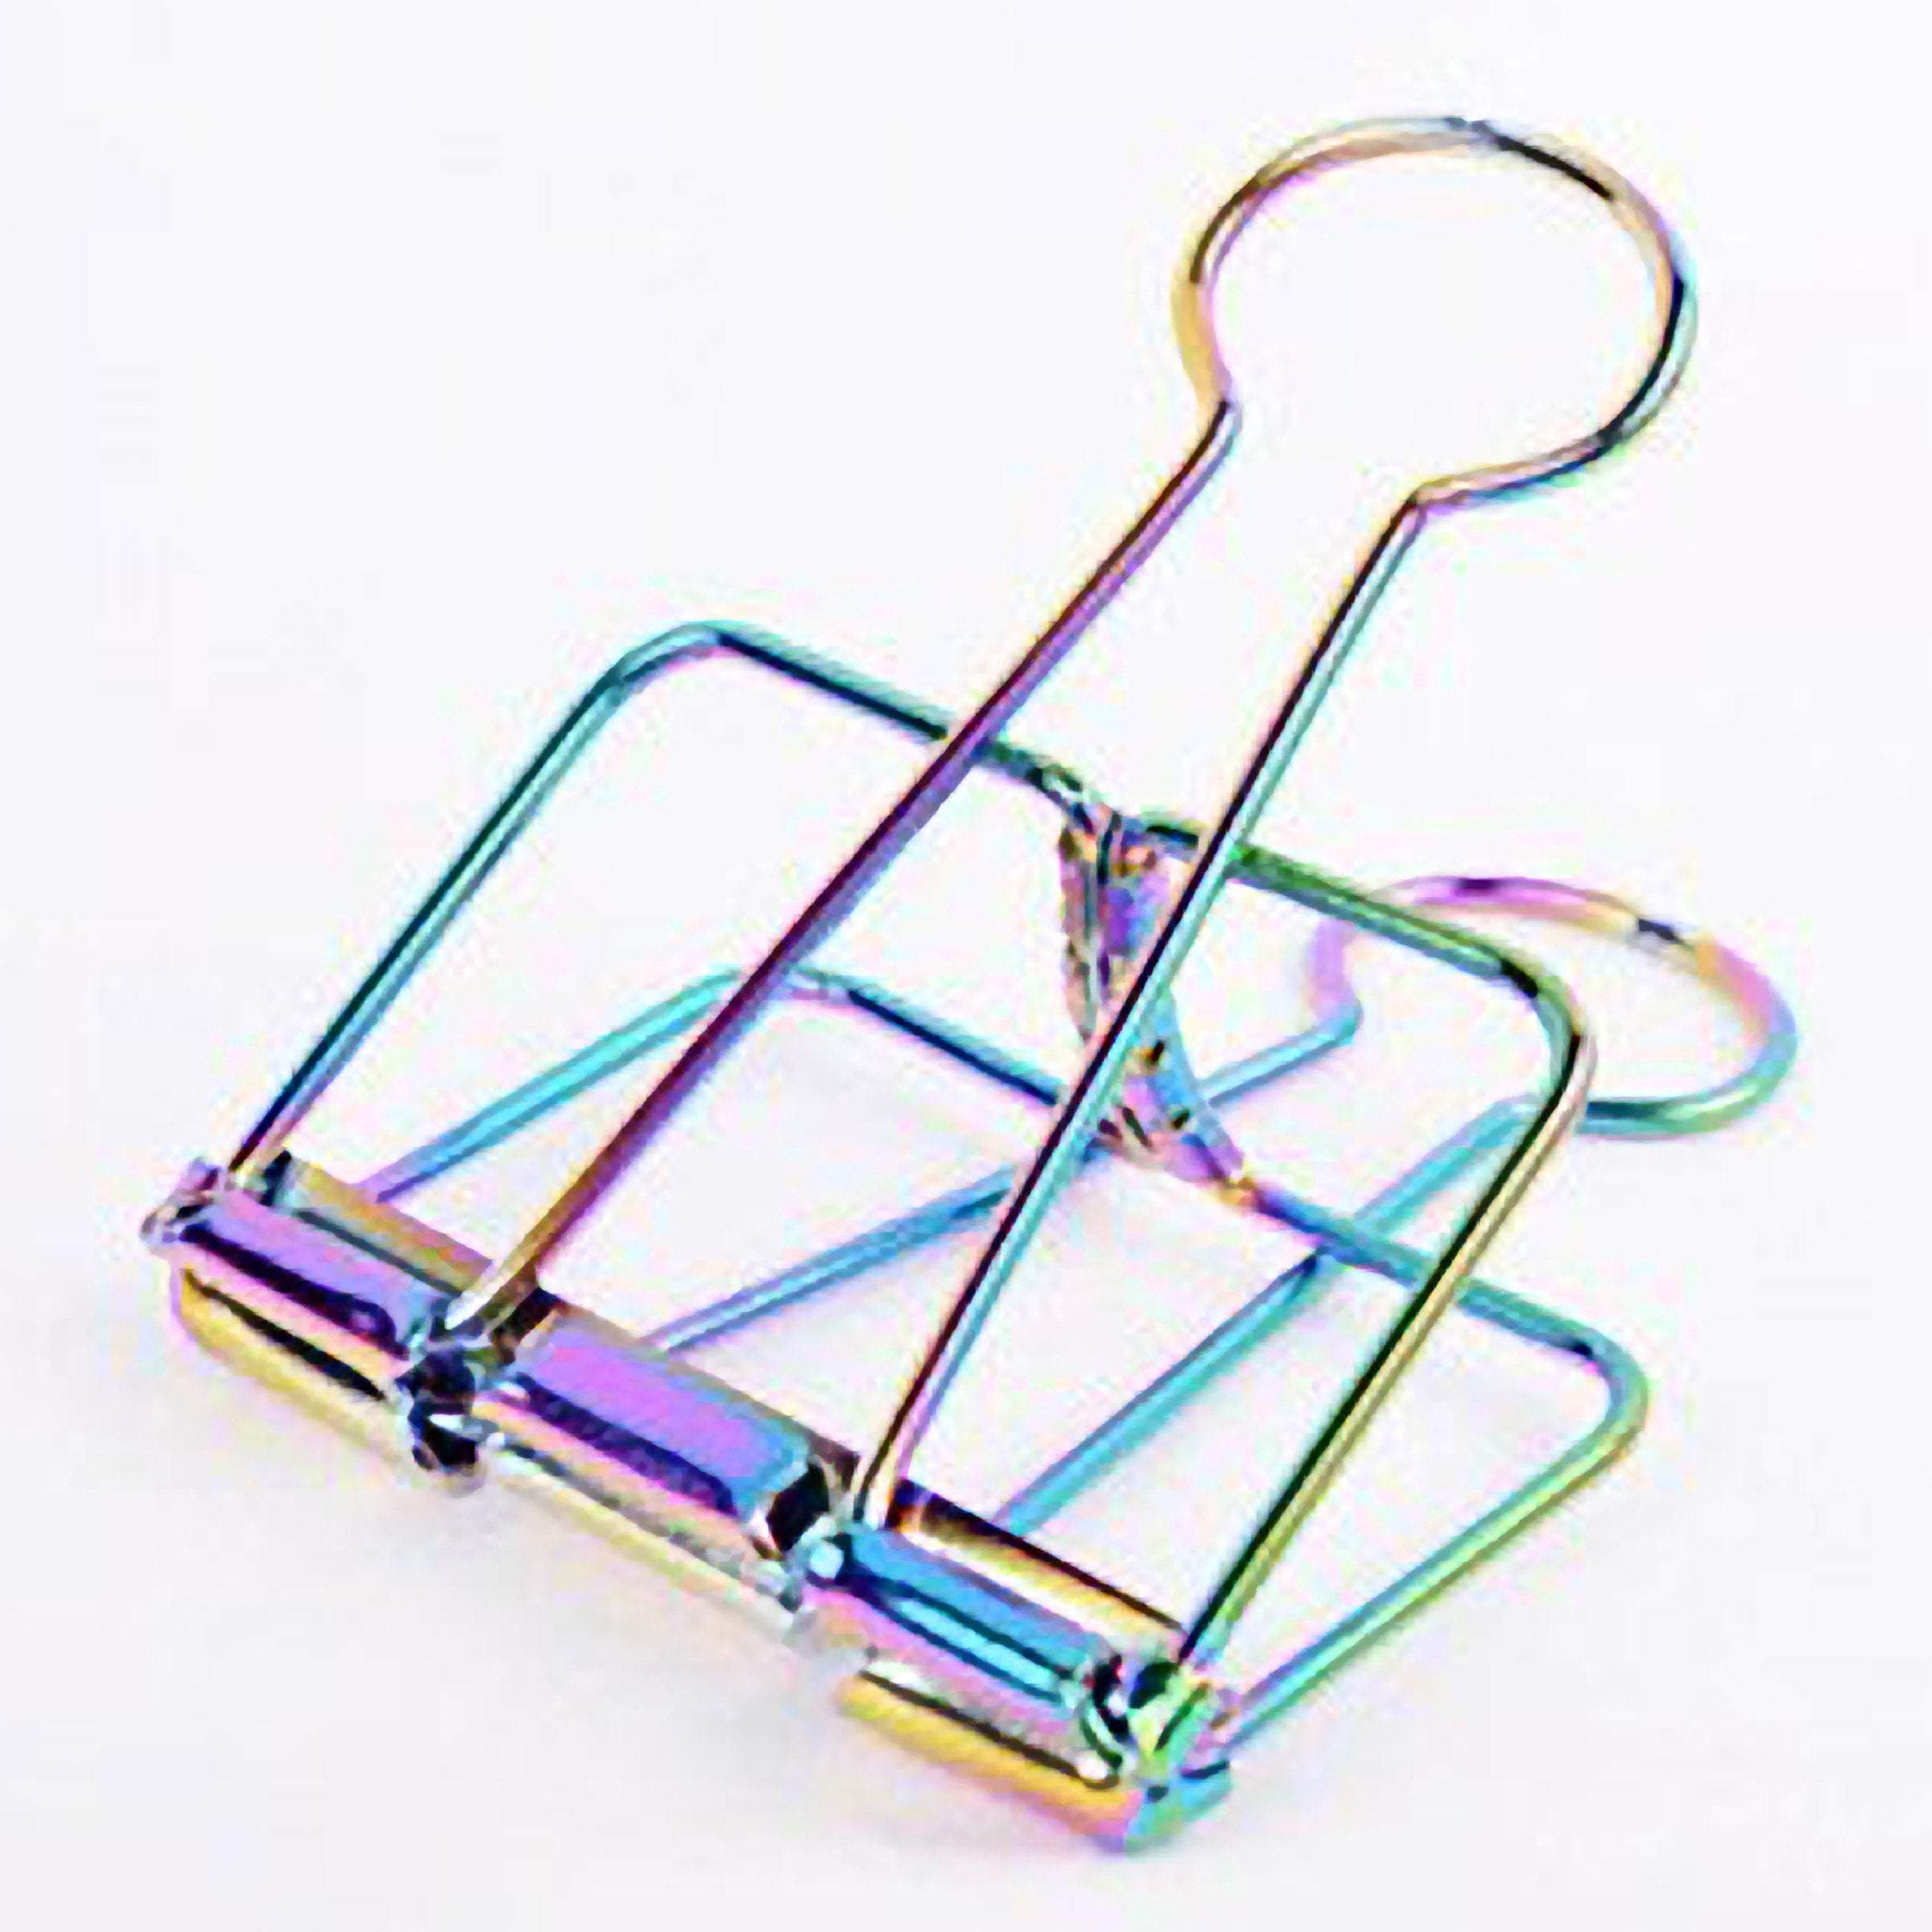 Itty-bitty Binder Clips the Worlds Smallest Binder Paper Clips 10